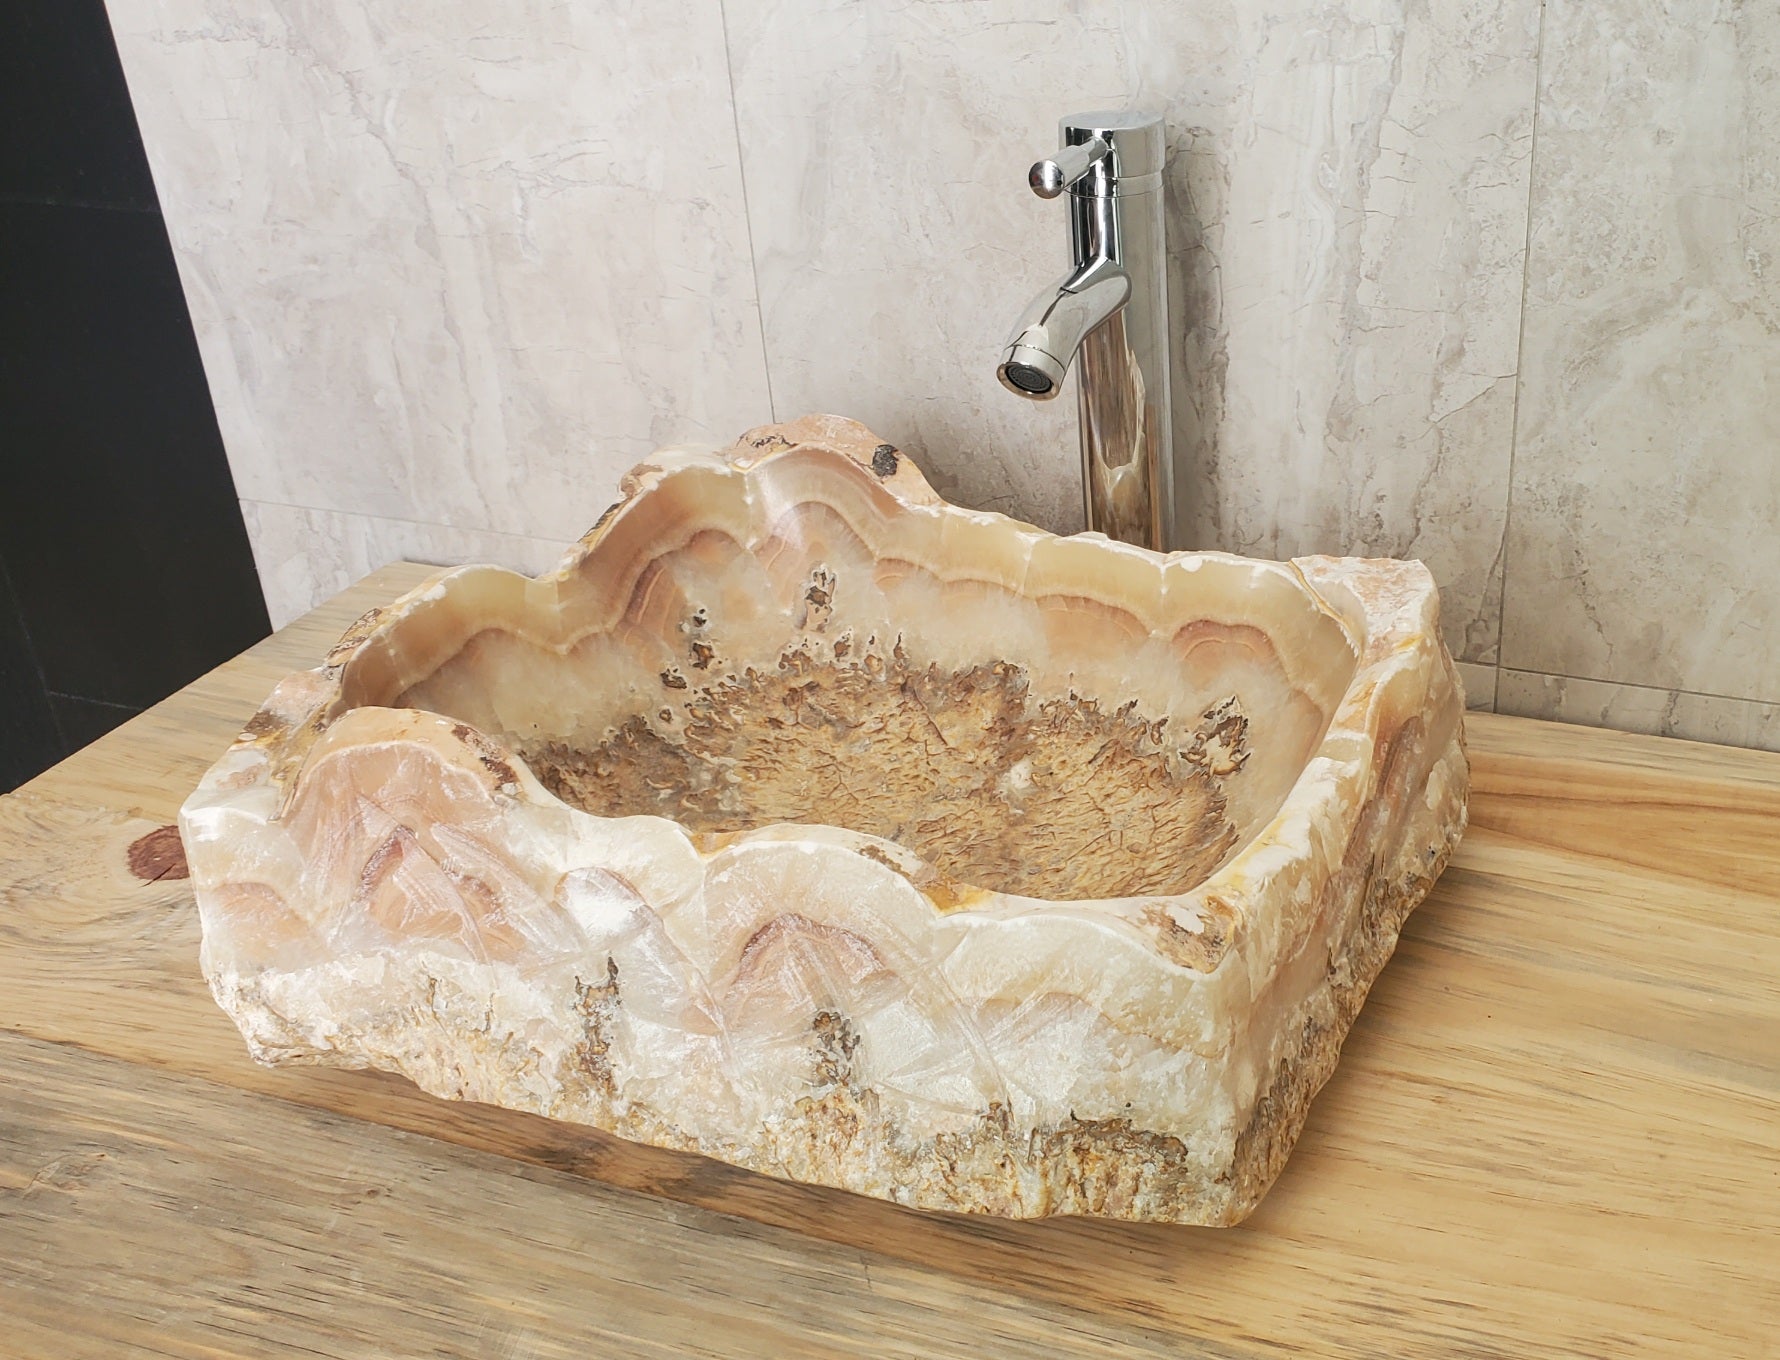 Brown and Tan Onyx Stone  Bathroom Vessel Sink. Epoxy Sealant is available with fast shipping. Standard drain size. A beautiful work of rustic art. Handmade. Buy Now at www.felipeandgrace.com